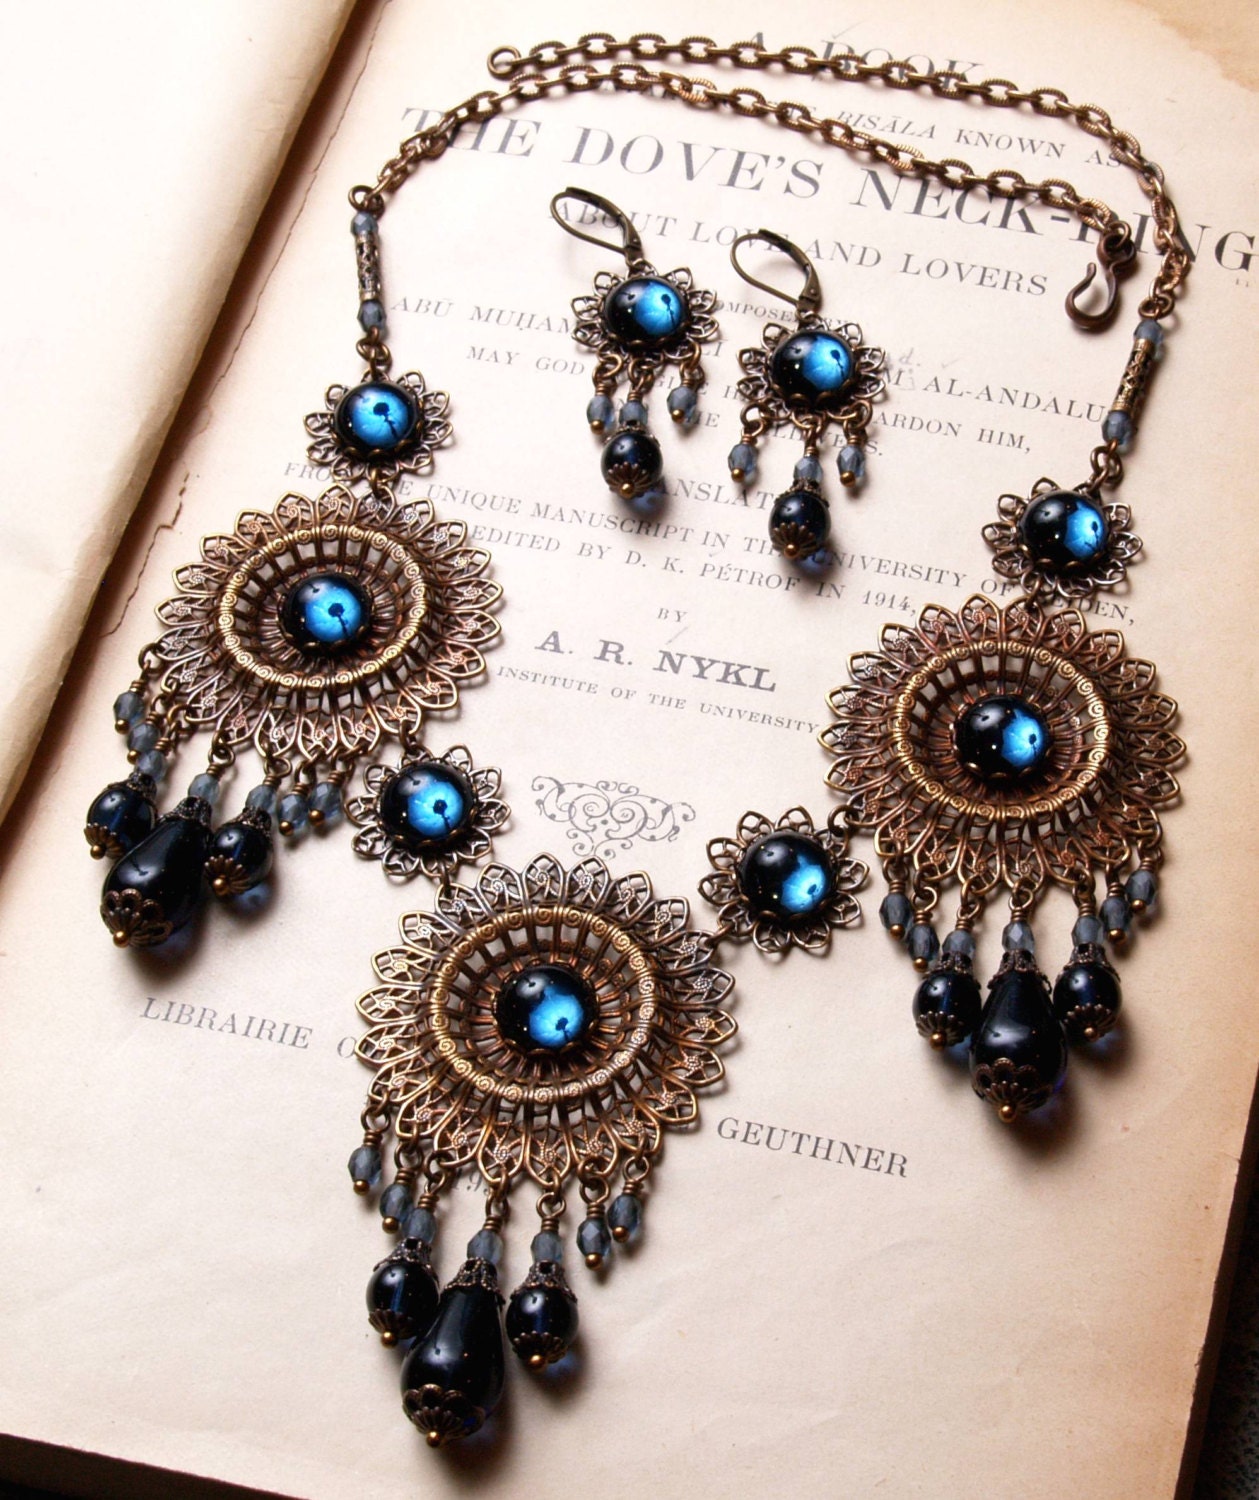 Stunning Art Nouveau Inspired Midnight Empress Necklace and Earrings Set